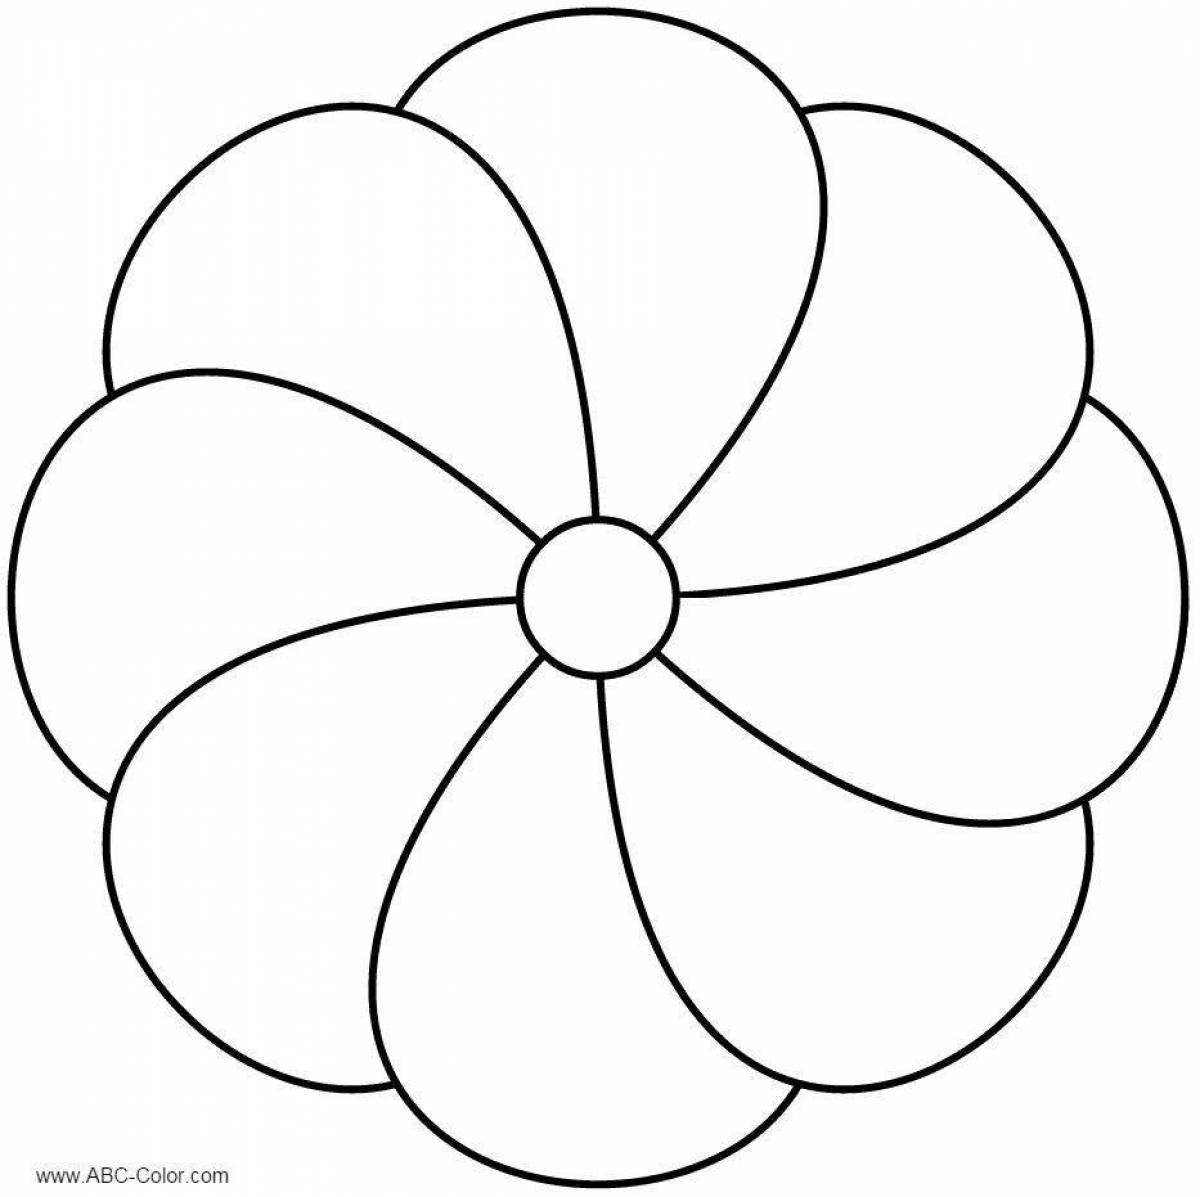 Colorful coloring page flower template with seven colors